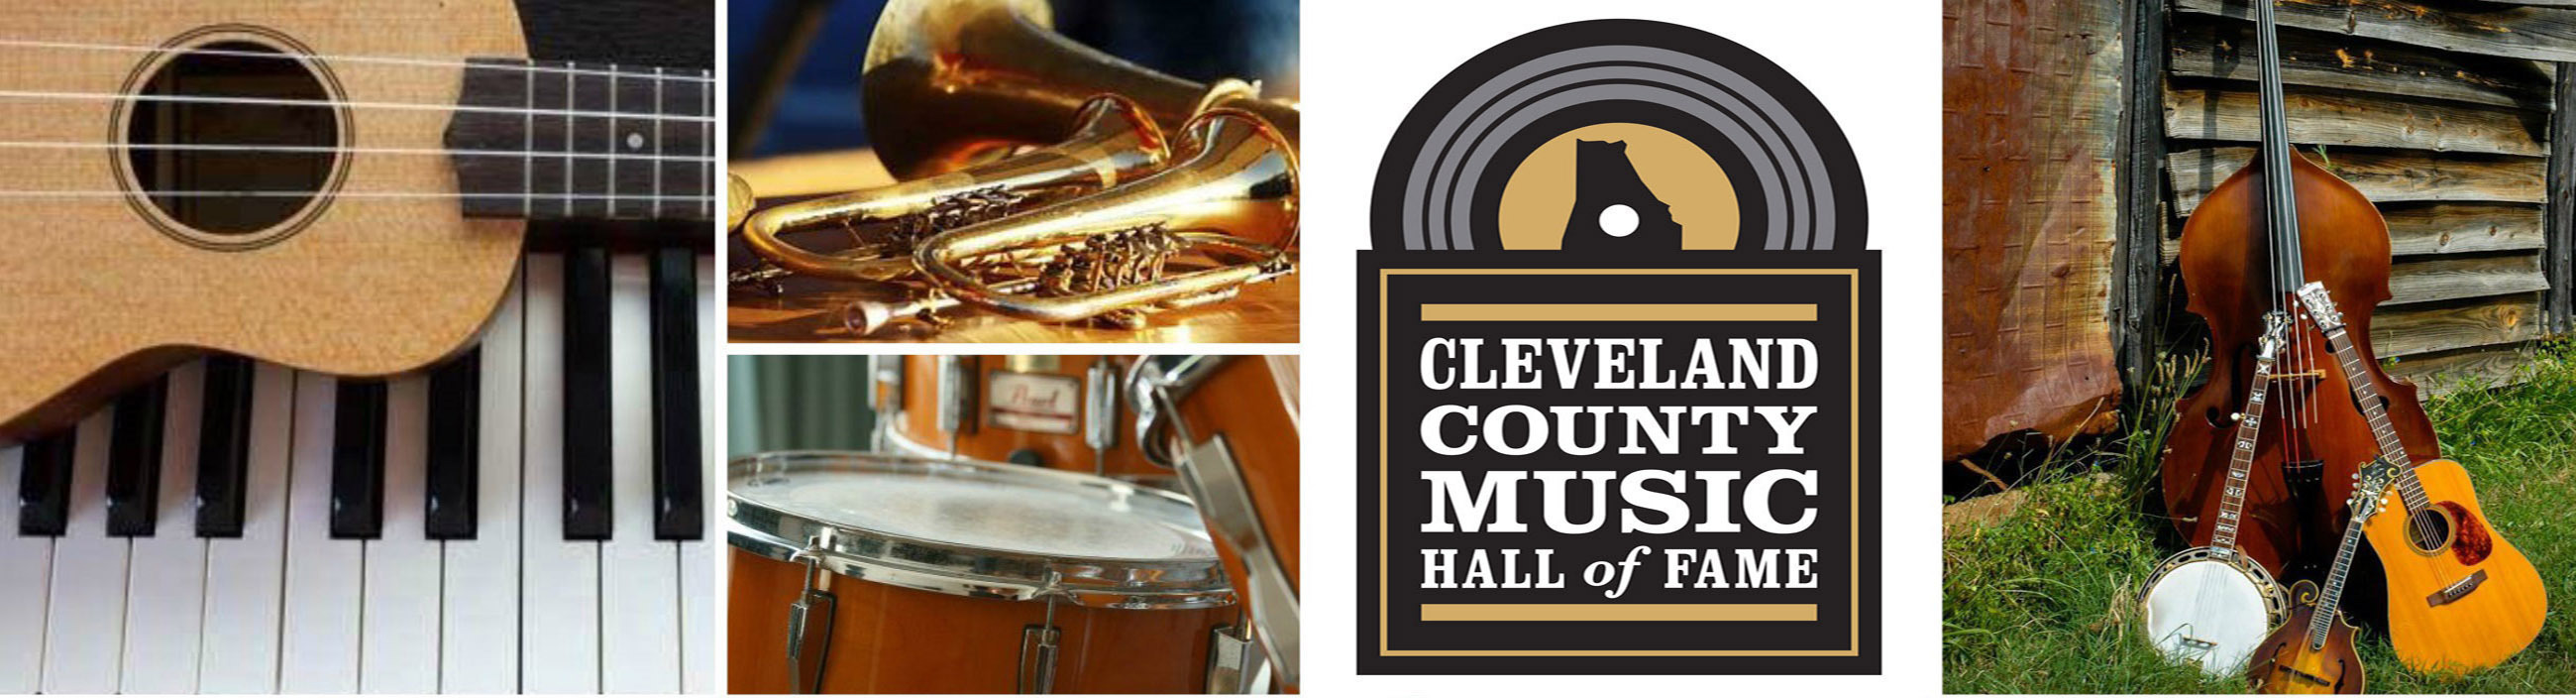 Cleveland County Music Hall Of Fame